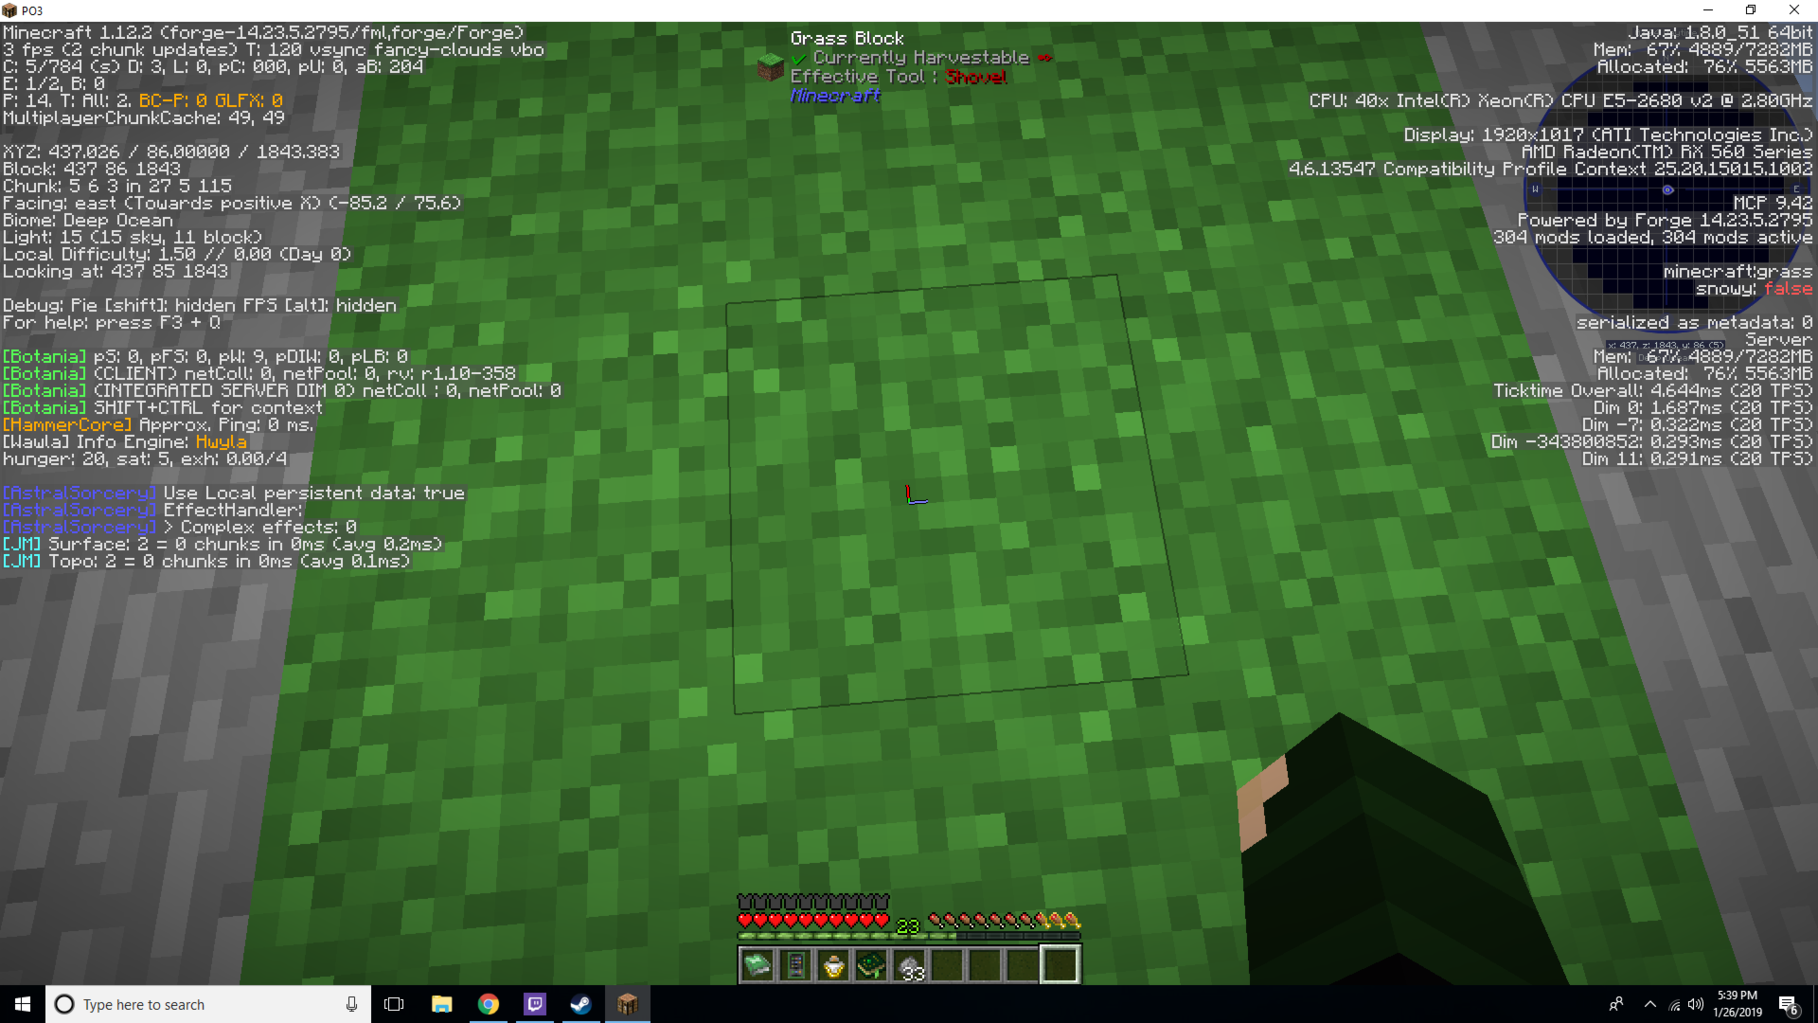 tick lag in a single player world - Java Edition Support - Support -  Minecraft Forum - Minecraft Forum